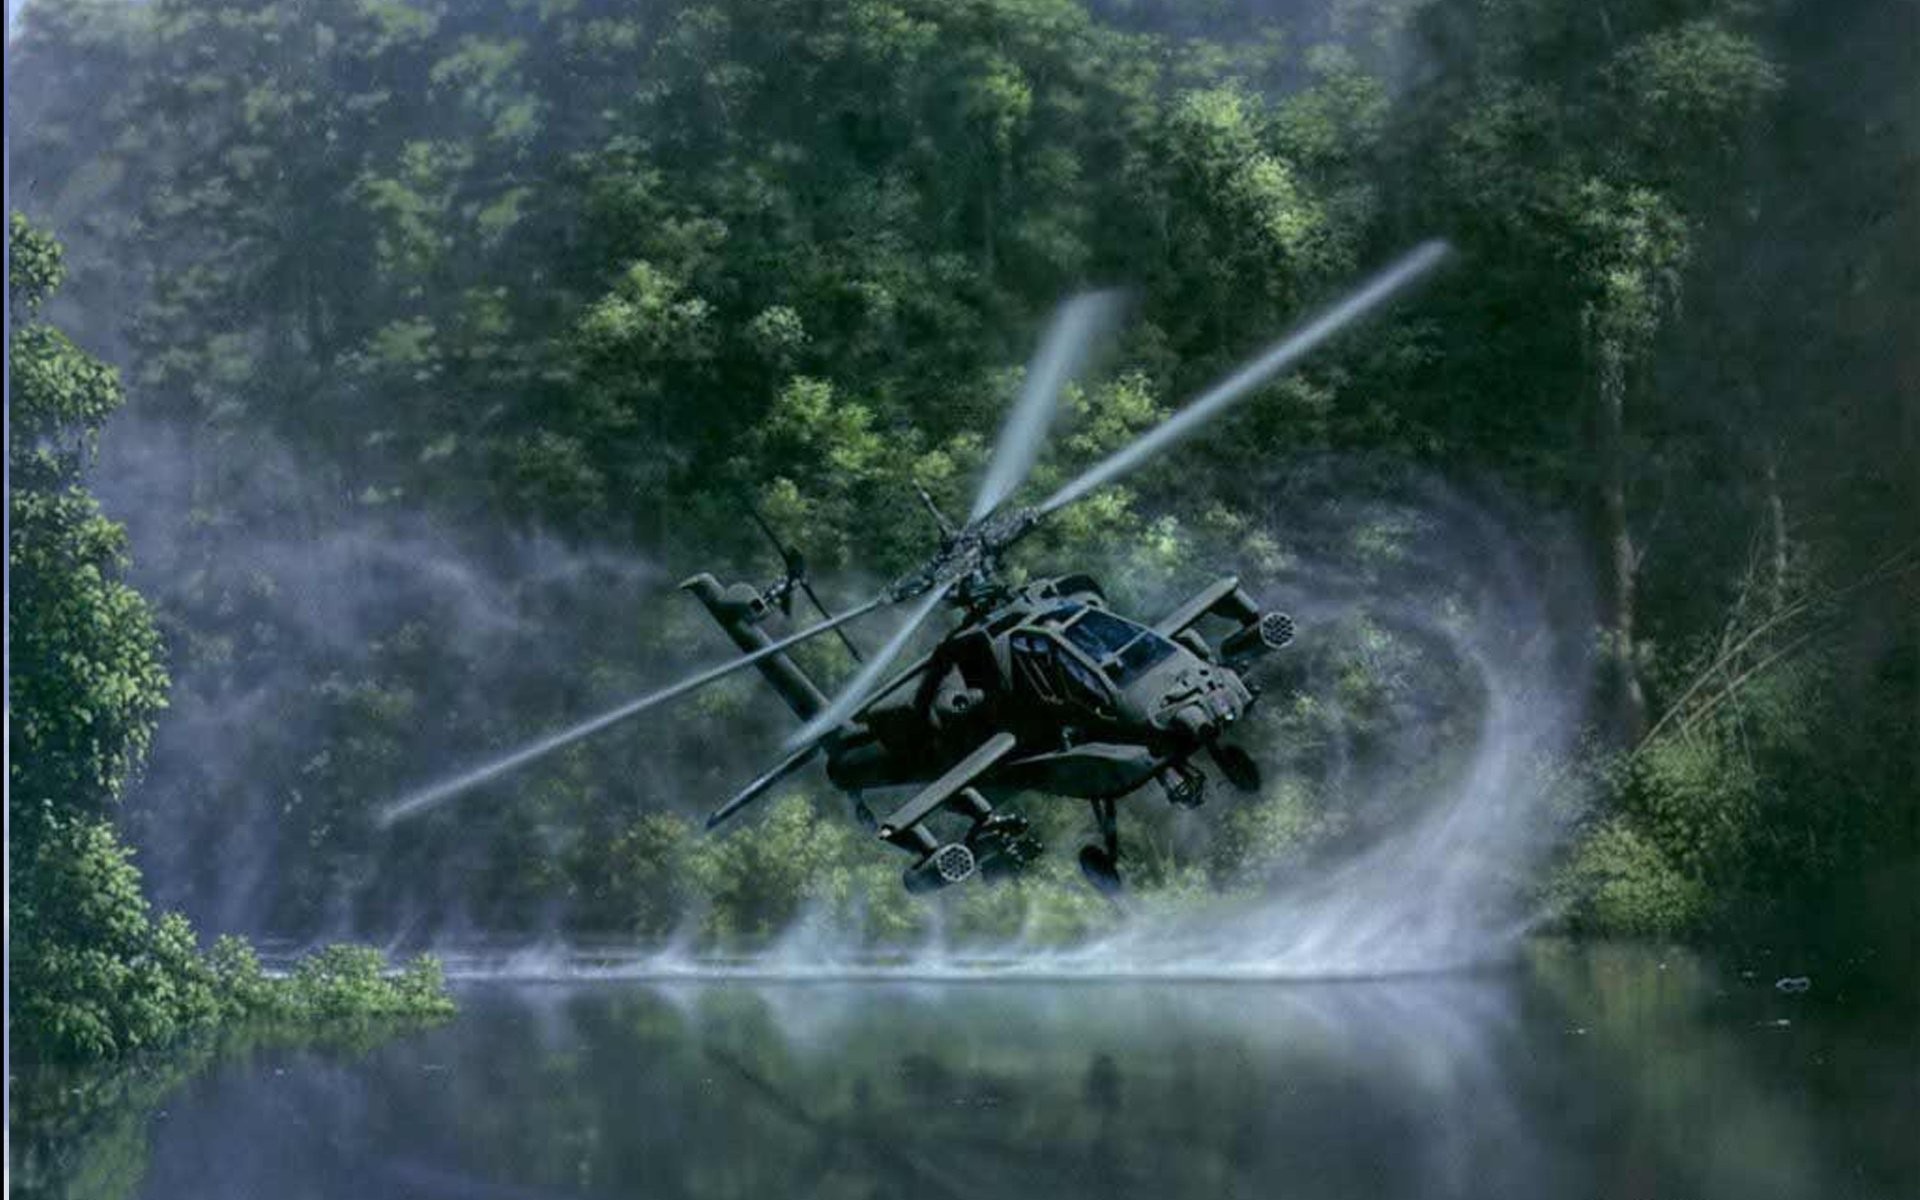 Apache Helicopter Wallpaper (69+ pictures)